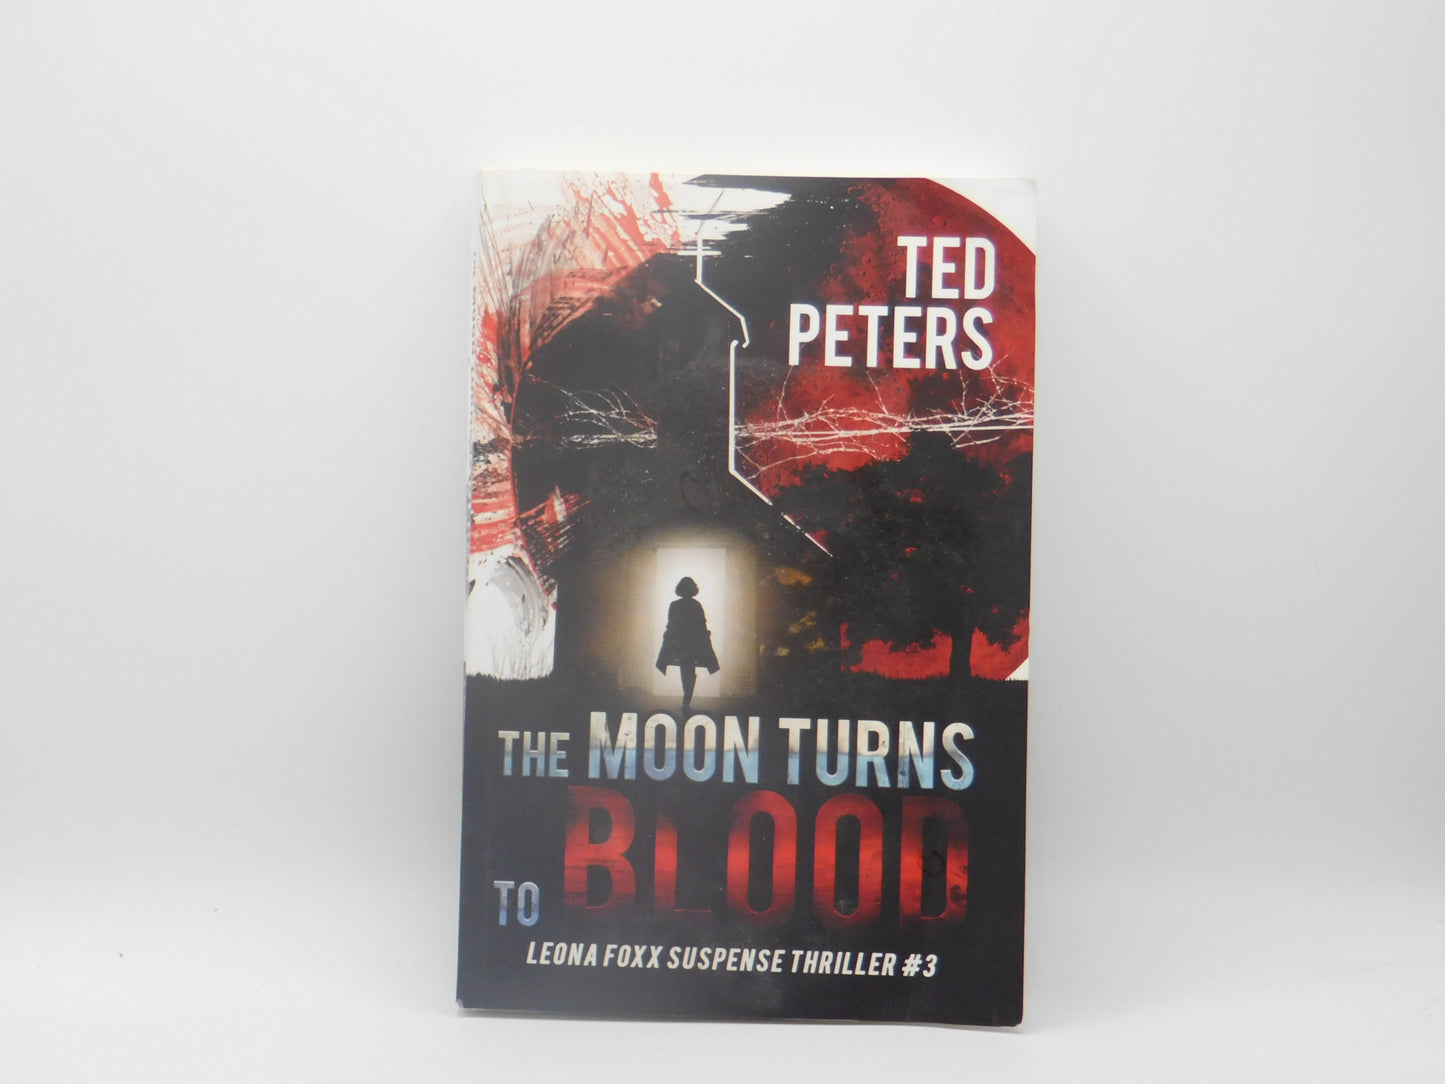 The Moon Turns to Blood by Ted Peters